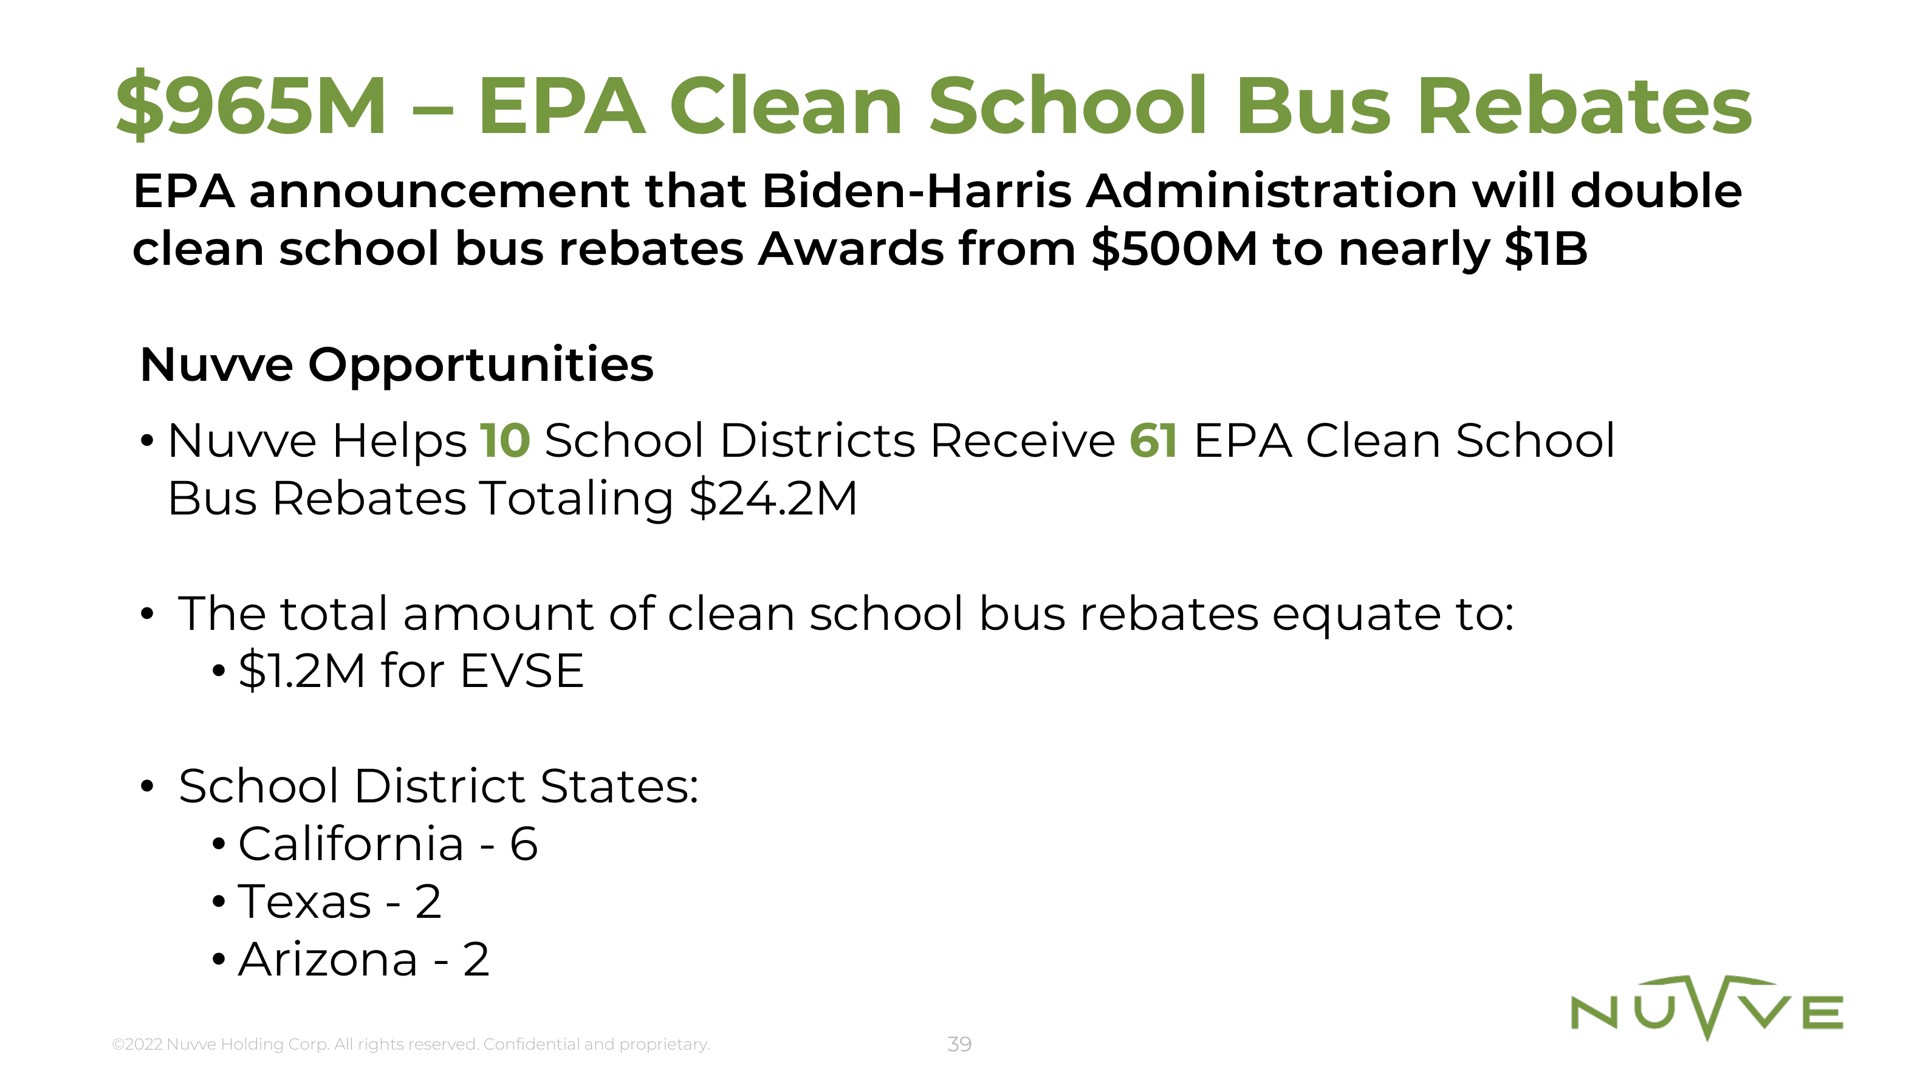 clean school bus rebates announcement that administration will double awards from to nearly opportunities helps districts receive totaling the total amount of equate to for district states | Nuvve